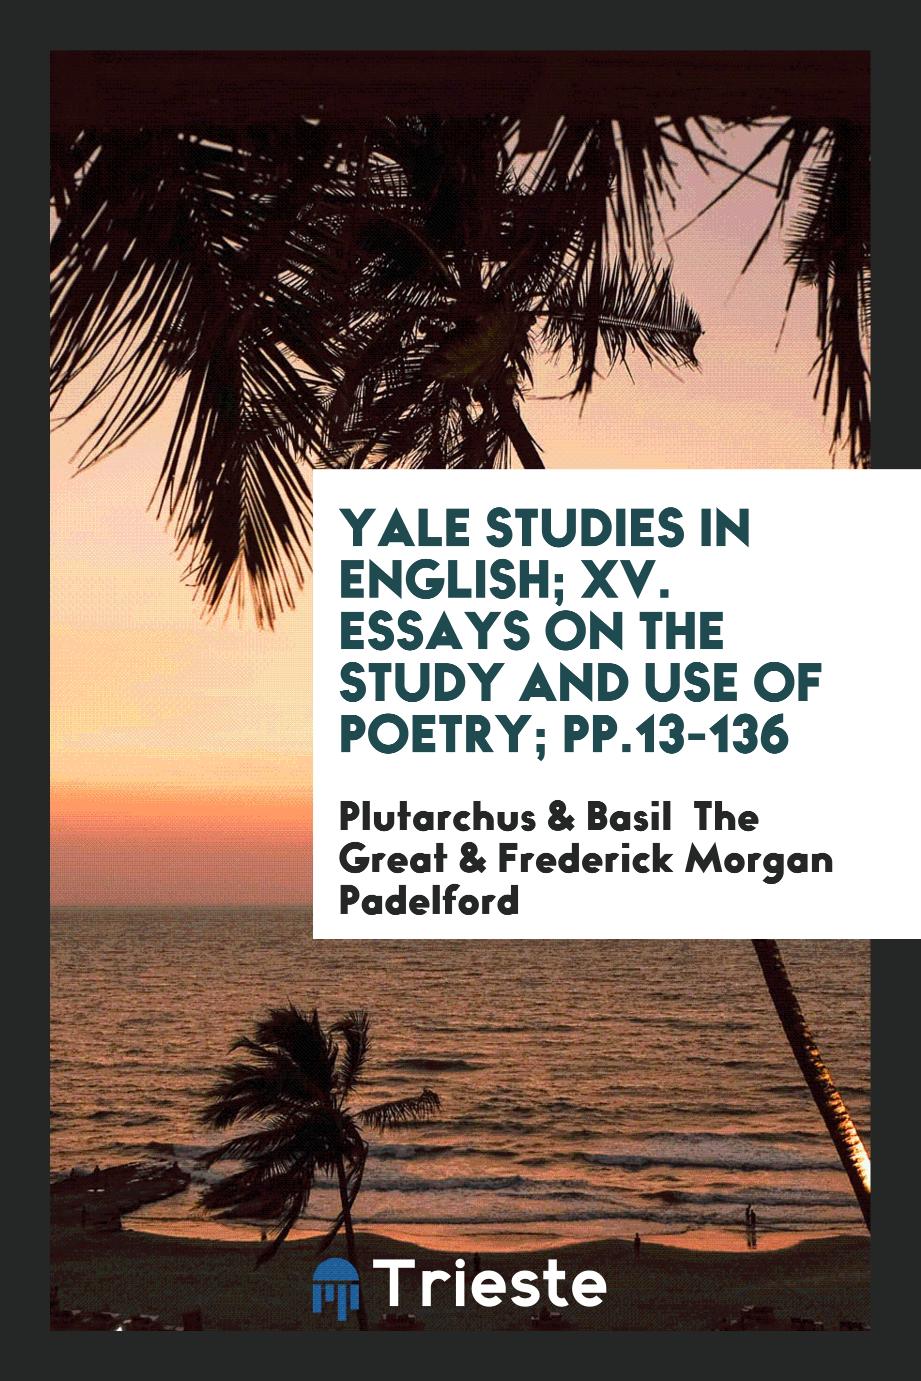 Plutarchus, Basil  The Great, Frederick Morgan  Padelford - Yale Studies in English; XV. Essays on the Study and Use of Poetry; pp.13-136